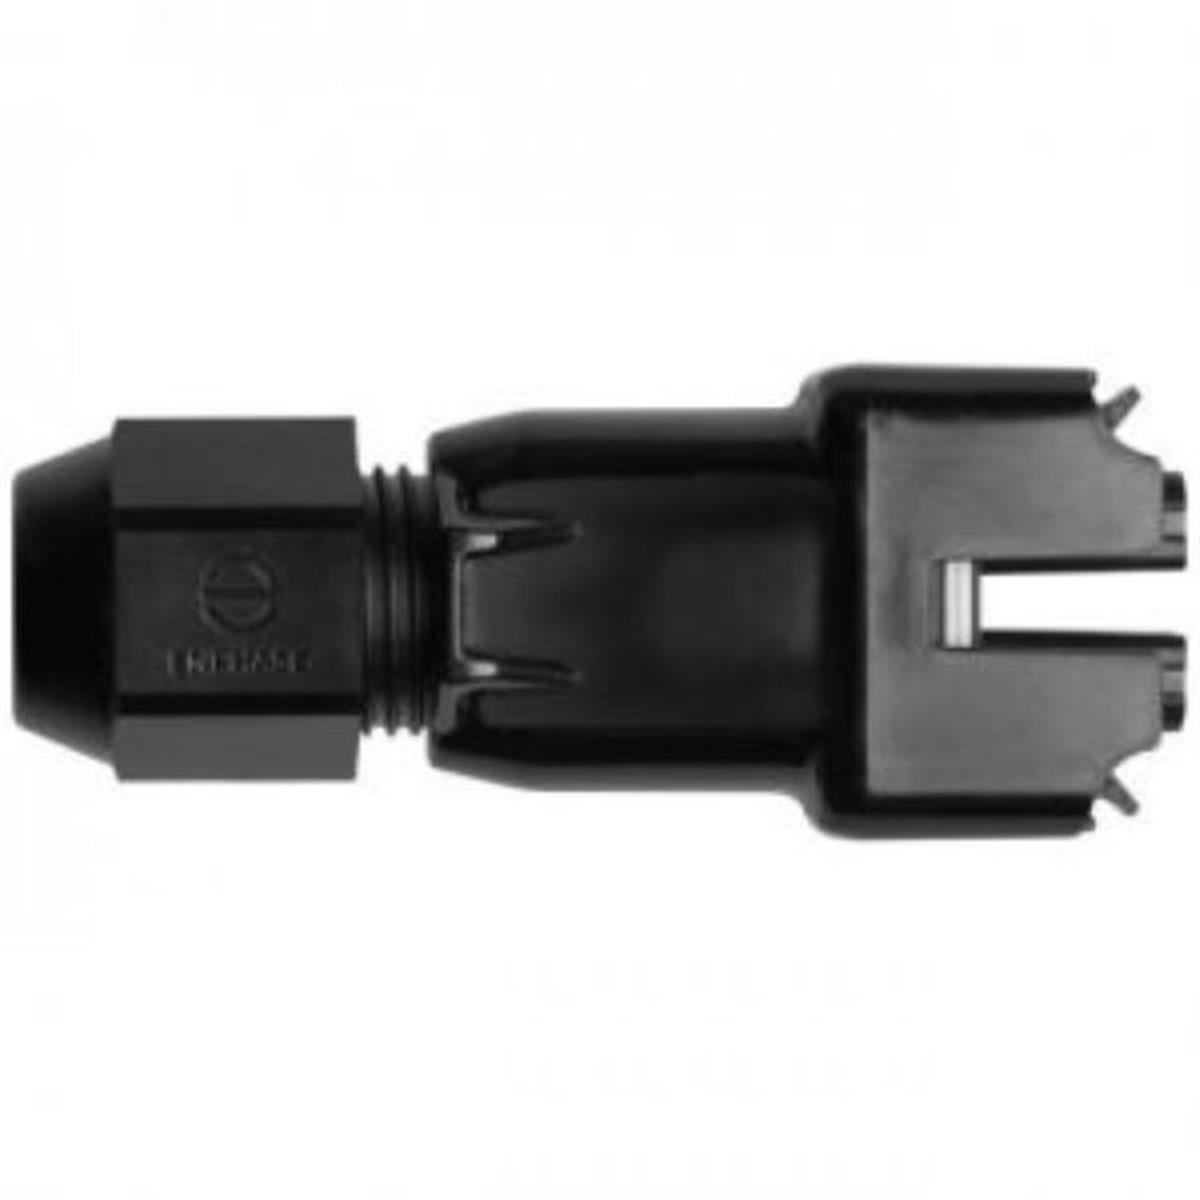 Enphase Field connector 1-phase - 10M